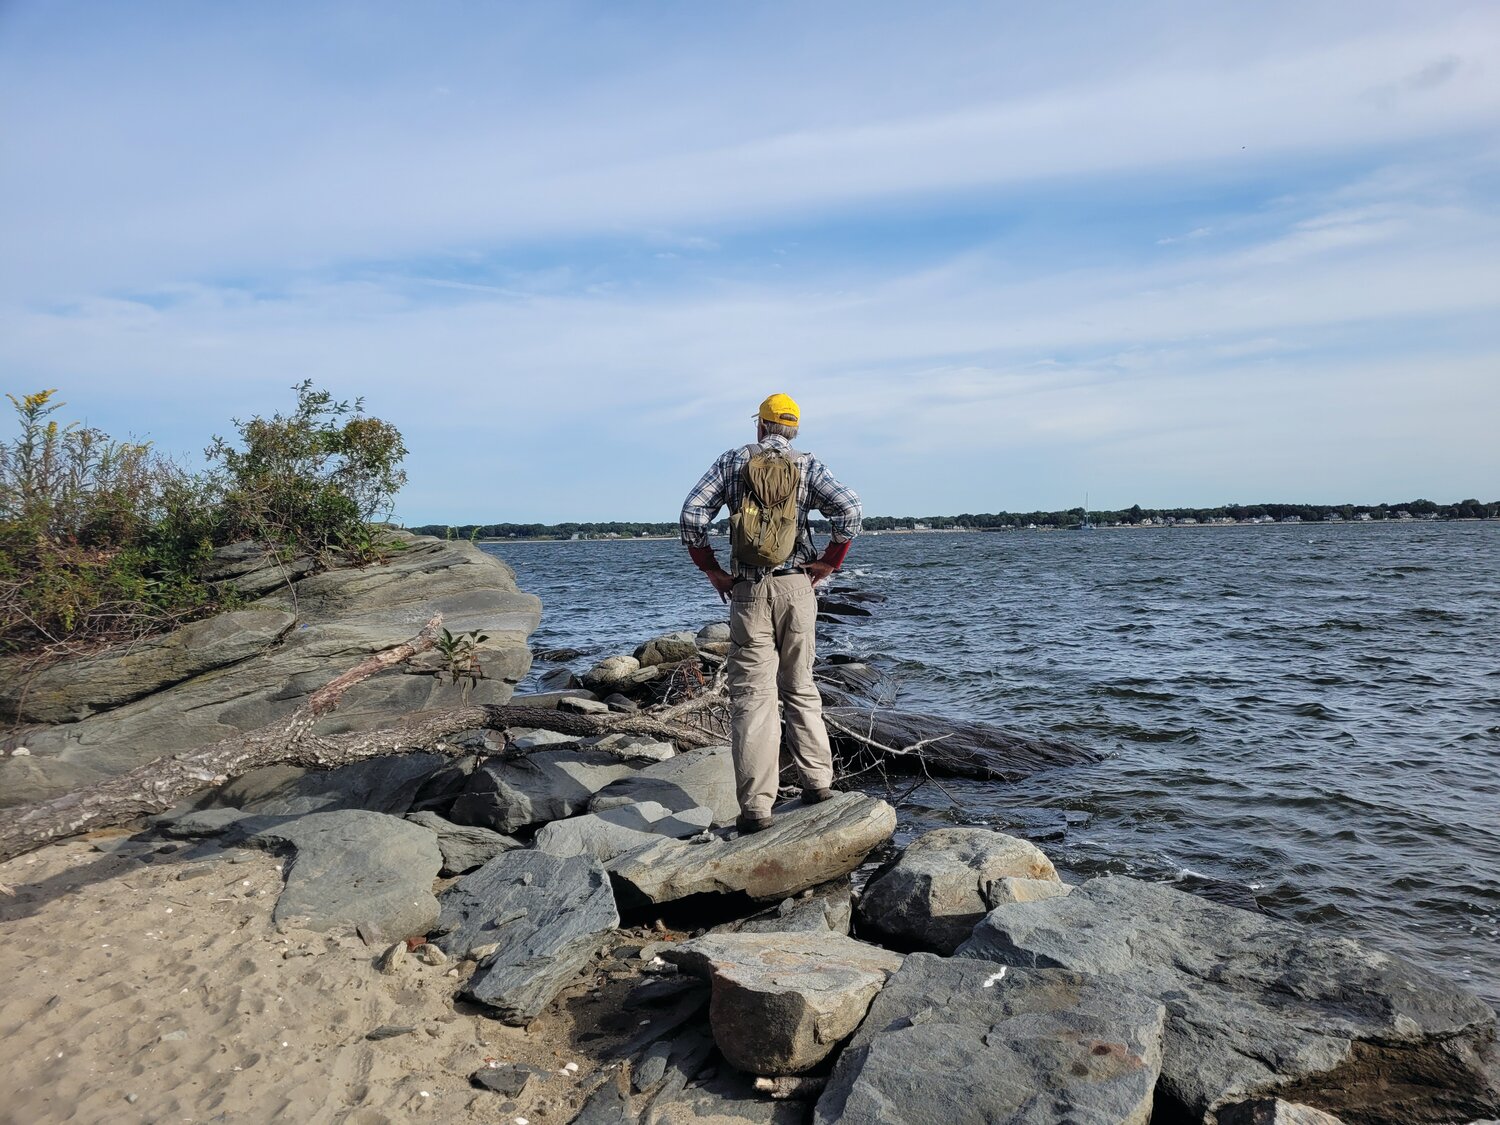 SEAPLANE SALLY: John Kostrzewa approaches the Sally Rocks, which stretch from the Goddard Memorial State Park beach in Warwick and into Greenwich Bay. The author discovered a WWI seaplane manufacturer set up operations a century ago on Chepiwanoxet Point.